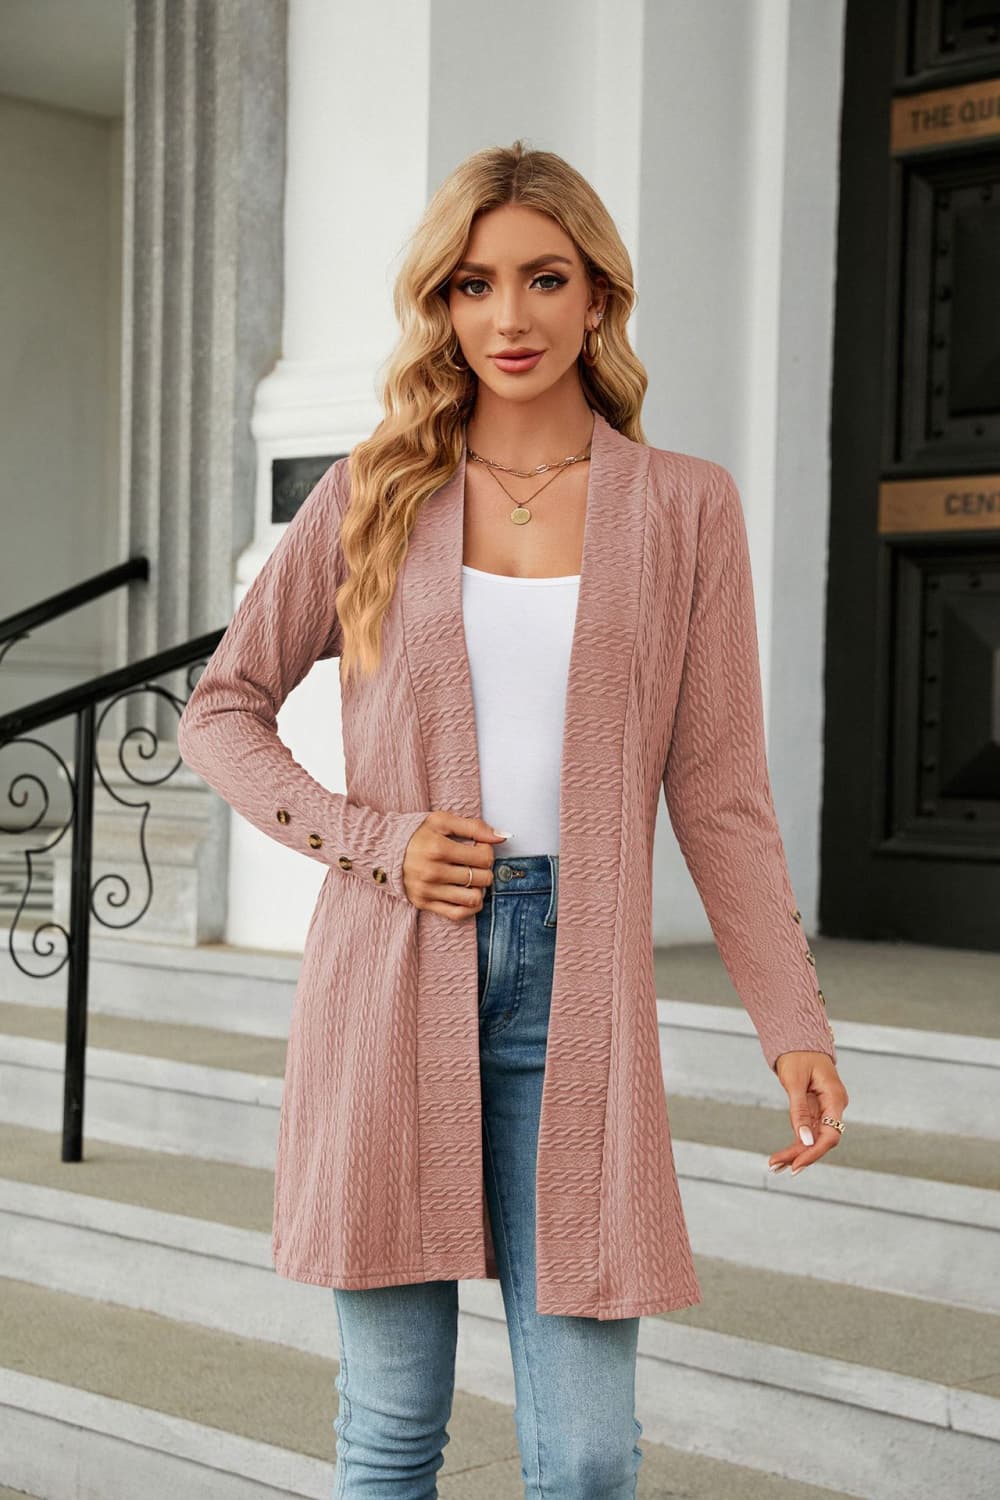 Long Sleeve Open Front Cardigan - Pink / S - Women’s Clothing & Accessories - Shirts & Tops - 7 - 2024